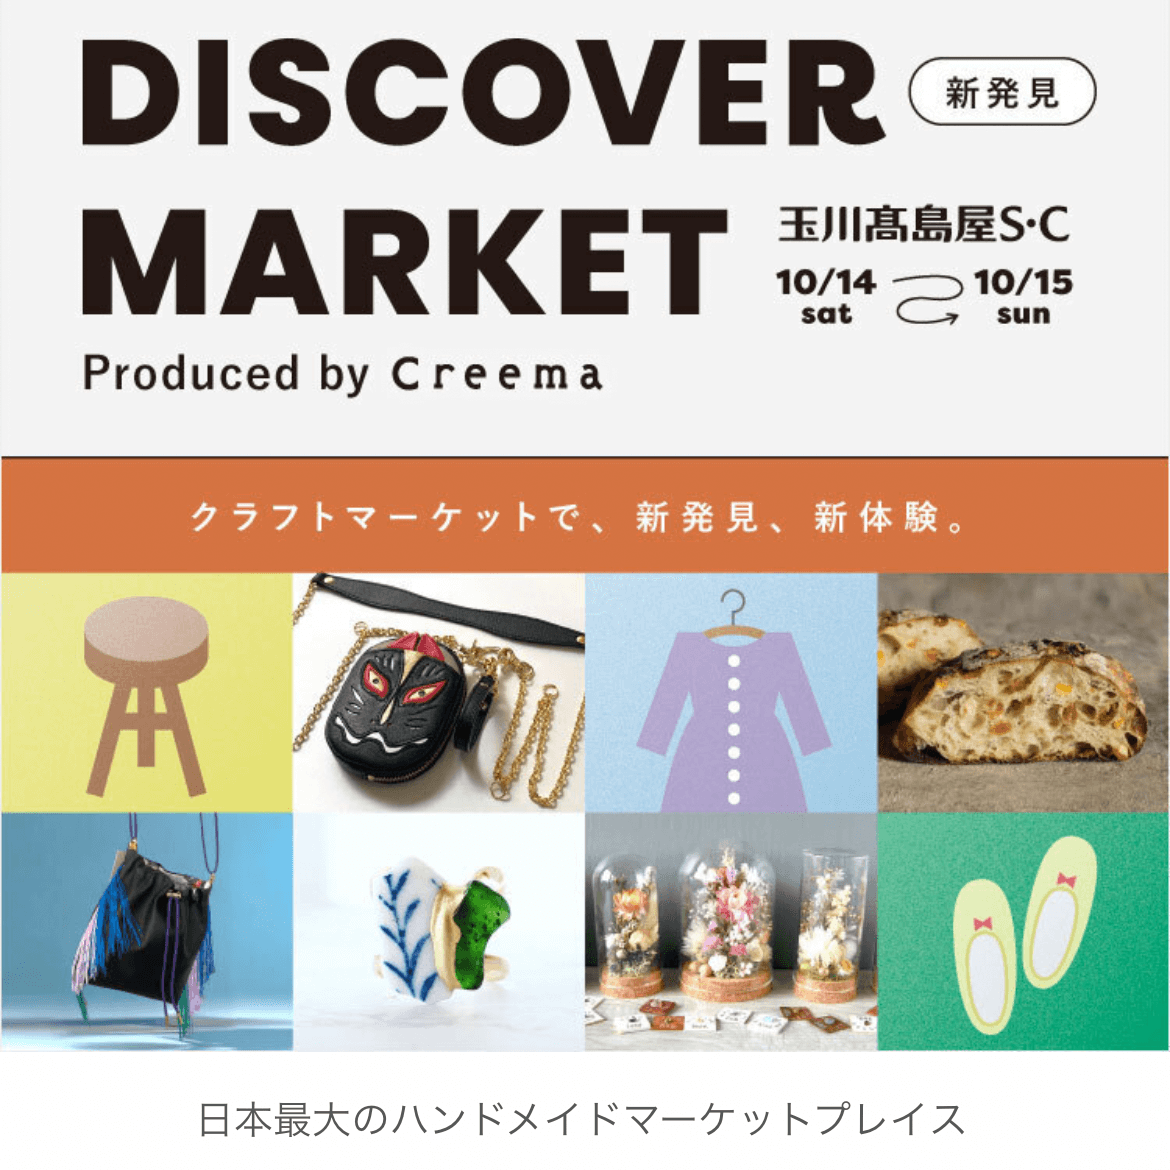 TAMAGAWA DISCOVER MARKET Produced by Creme